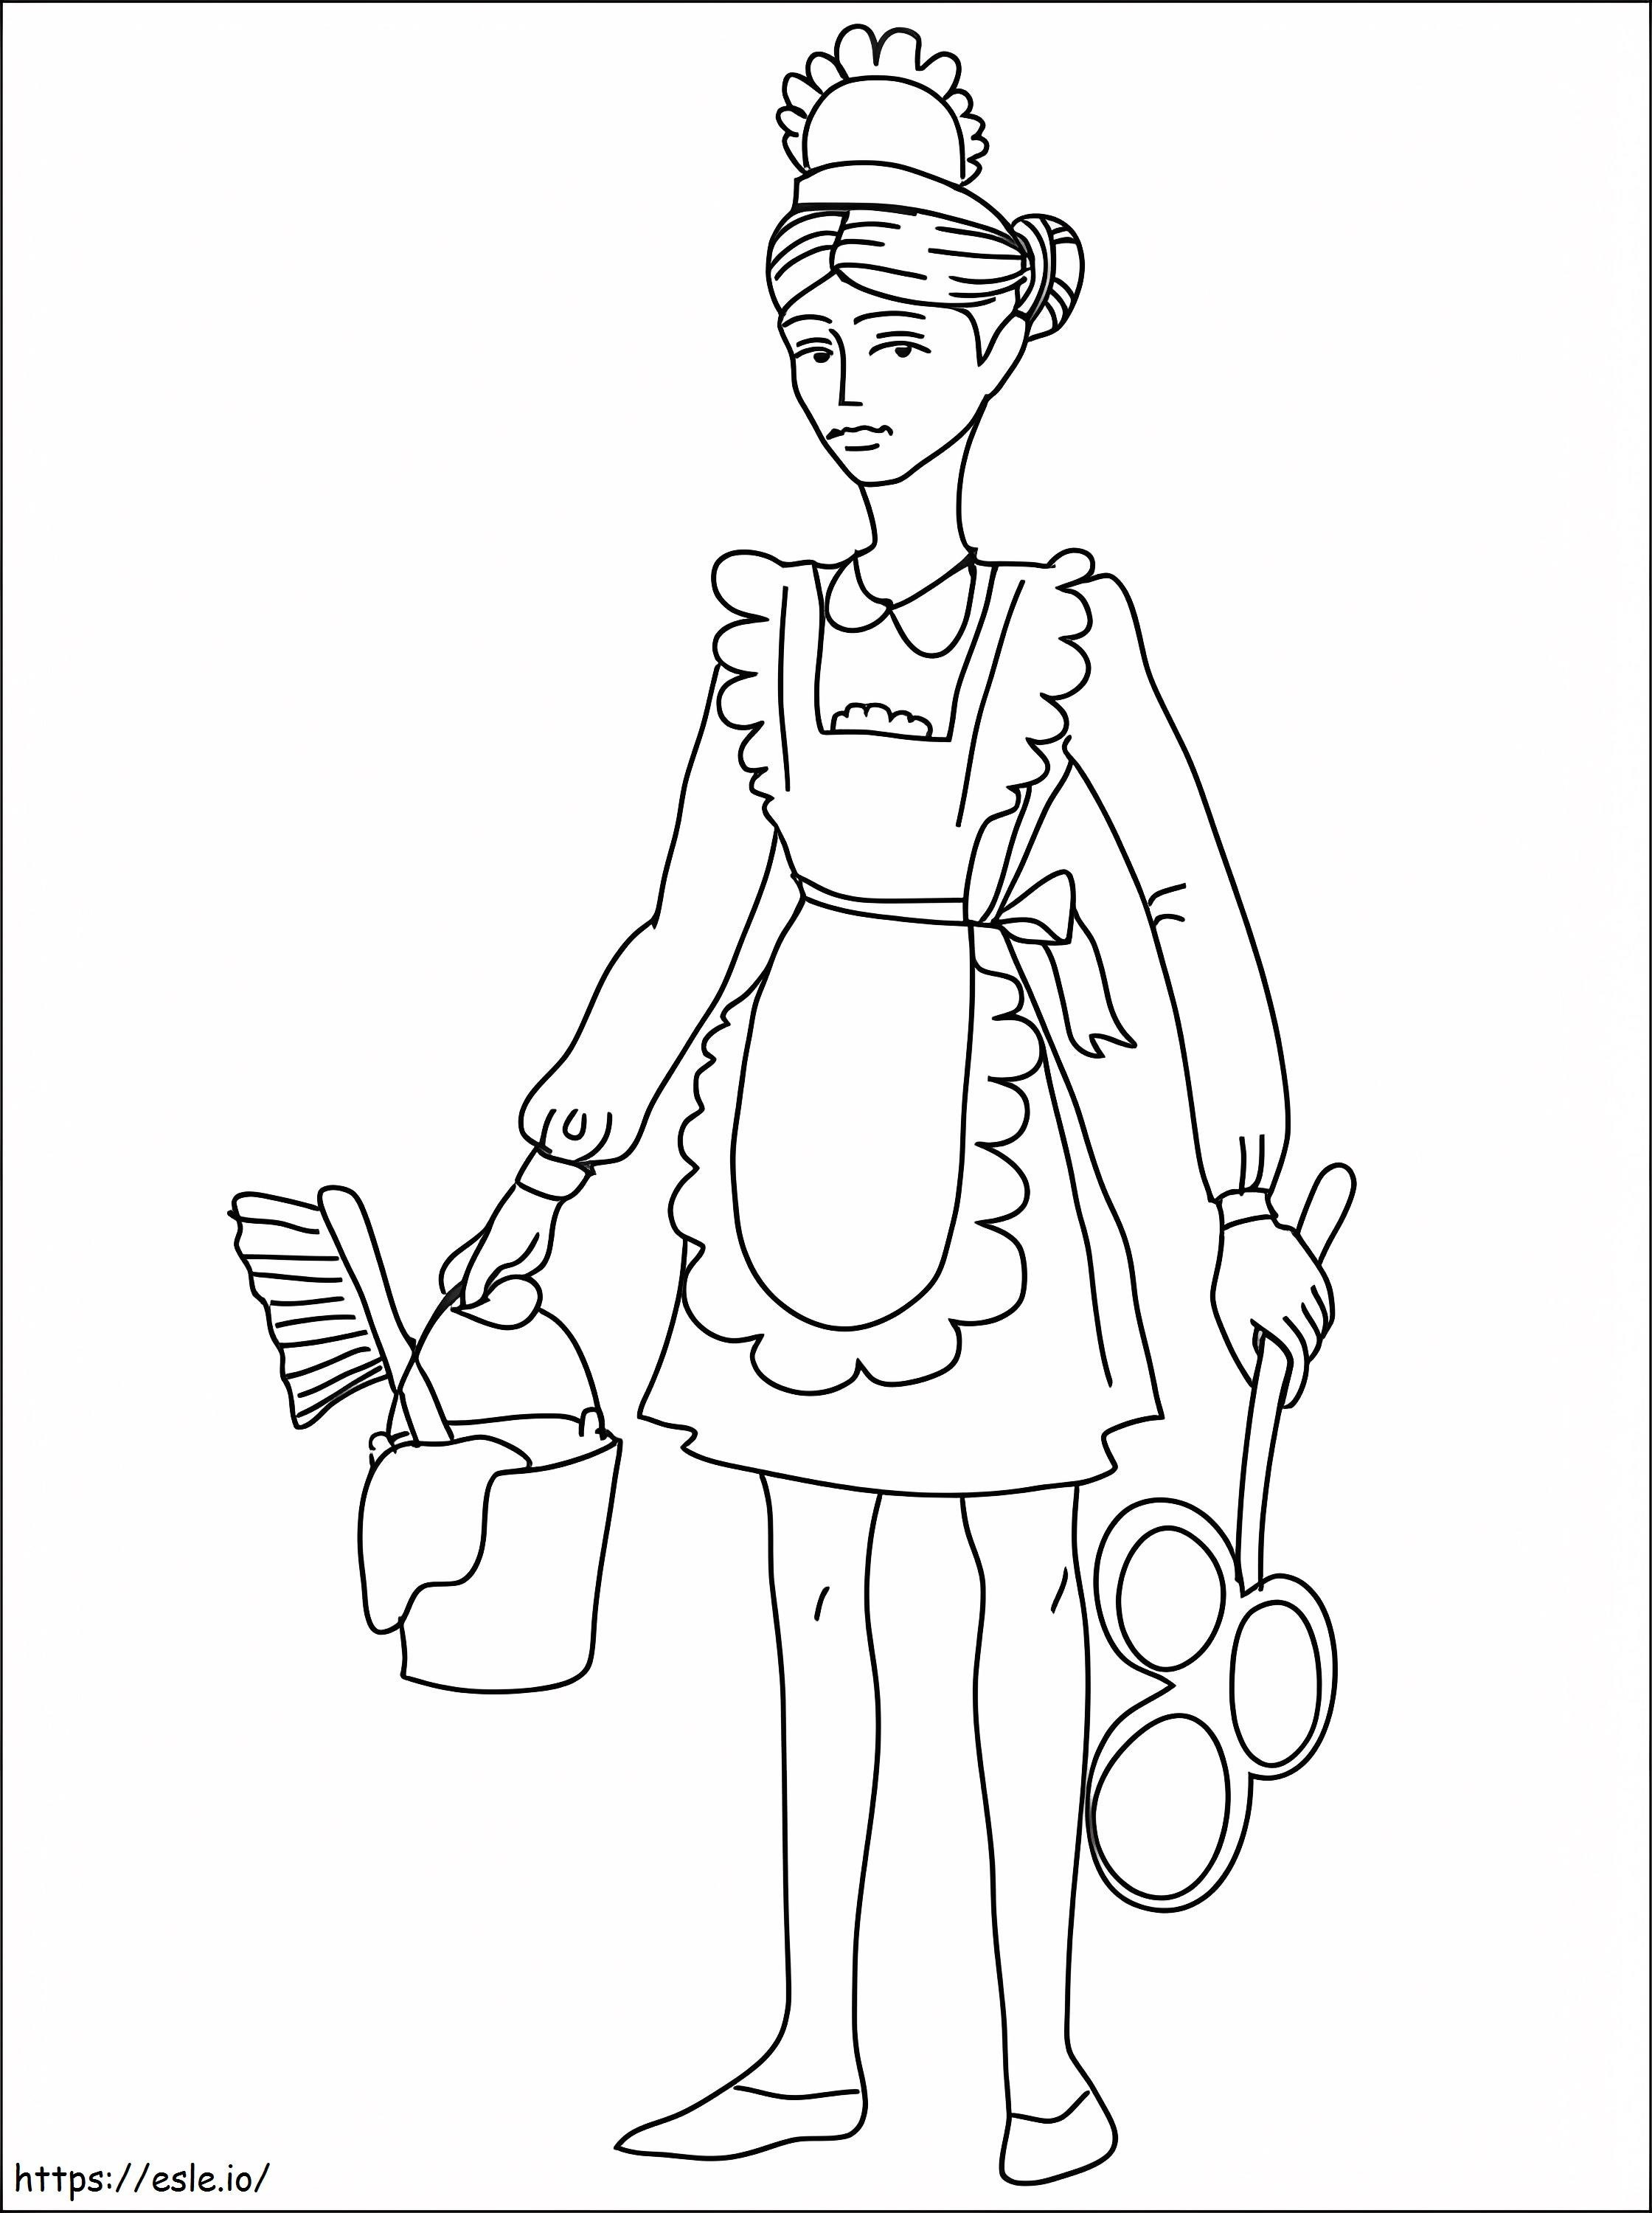 Maid 3 coloring page